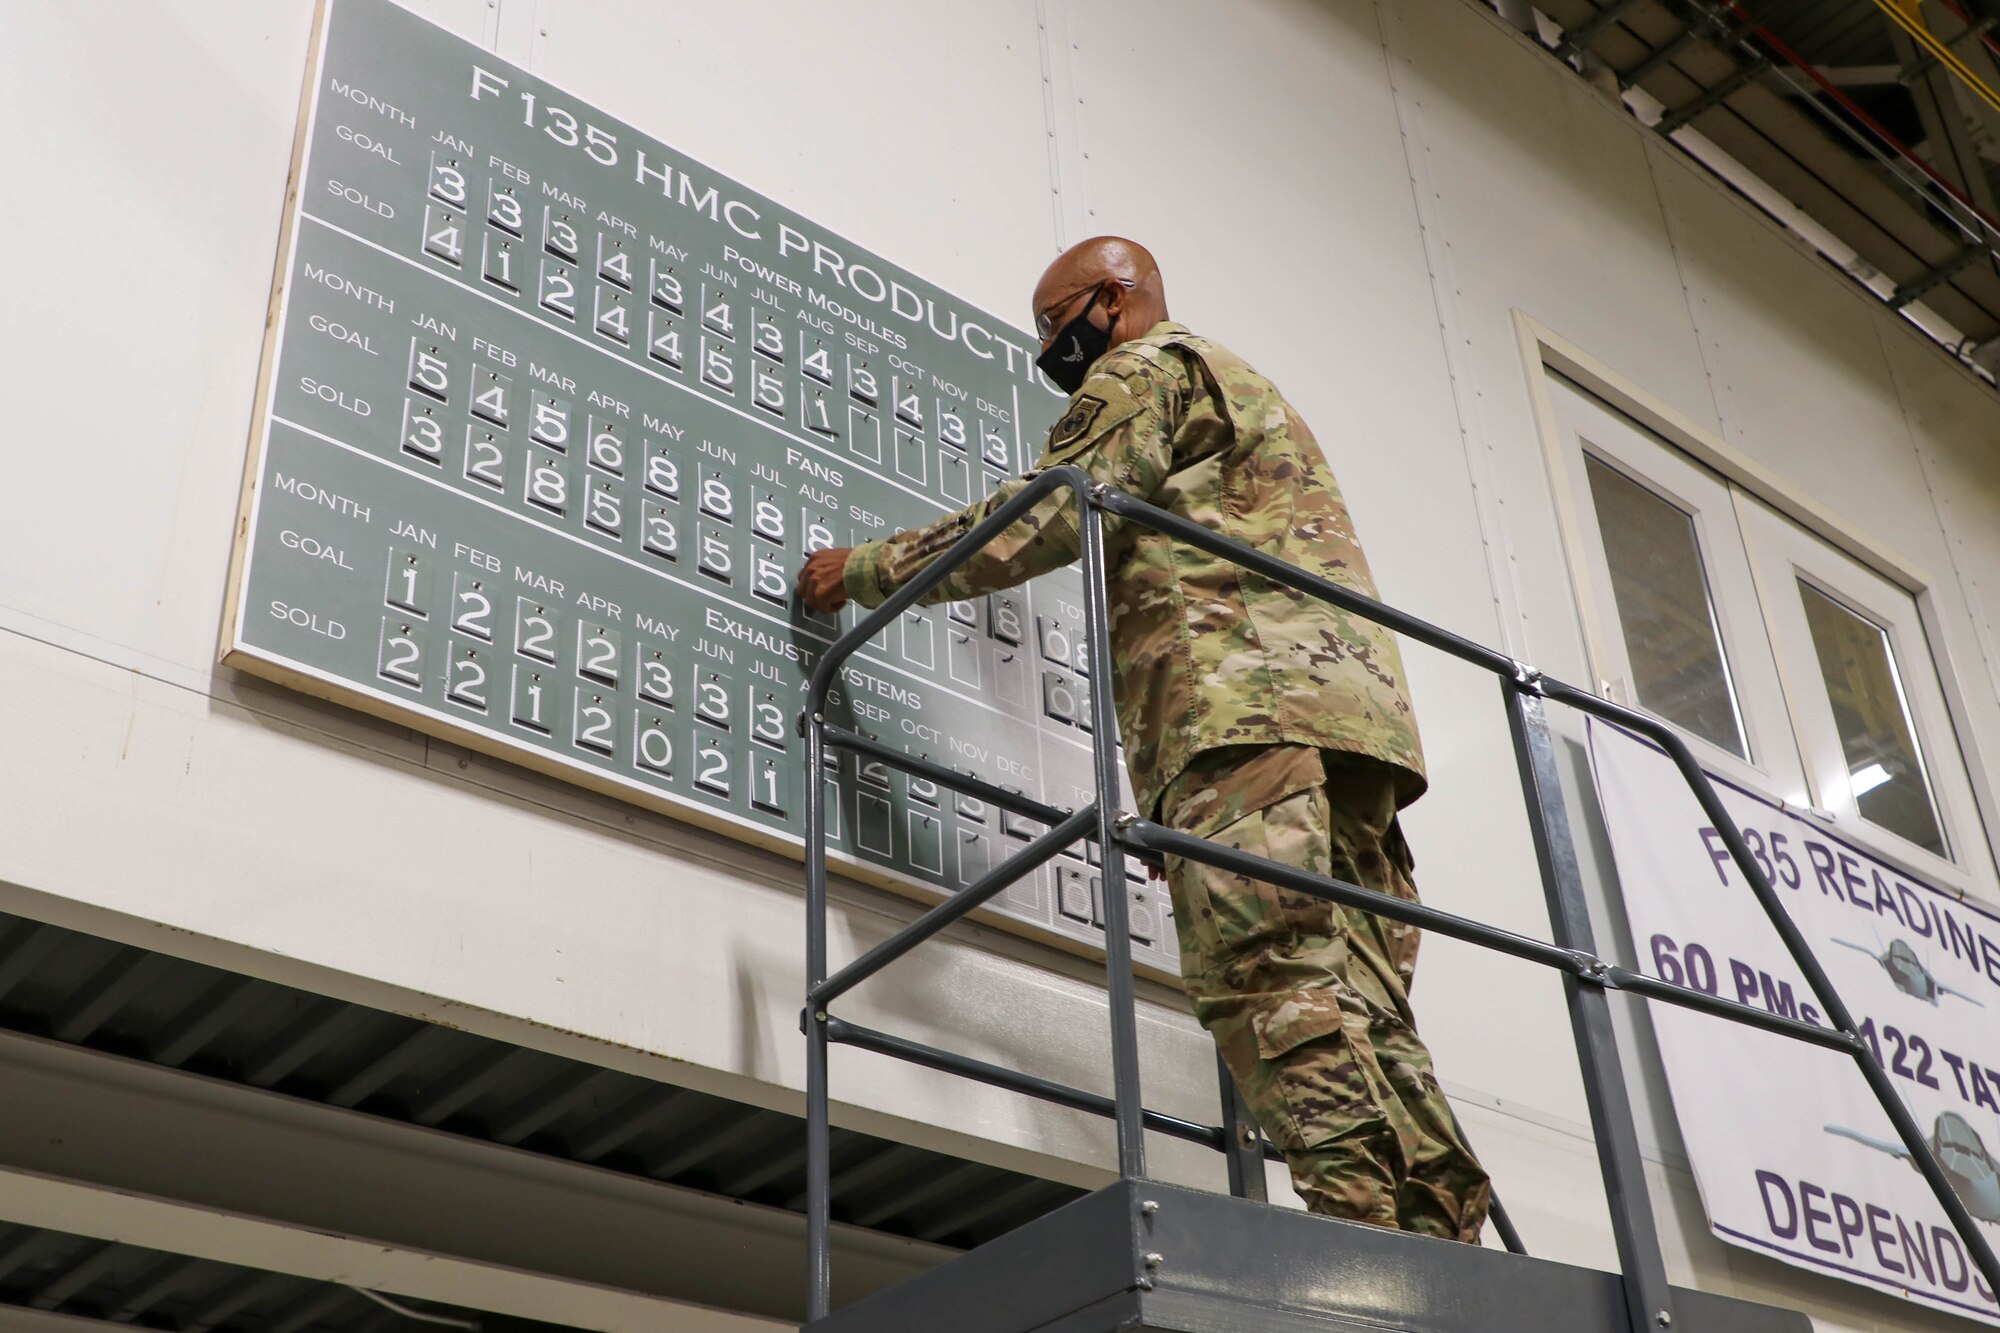 A man standing on a ladder, putting numbers on a board